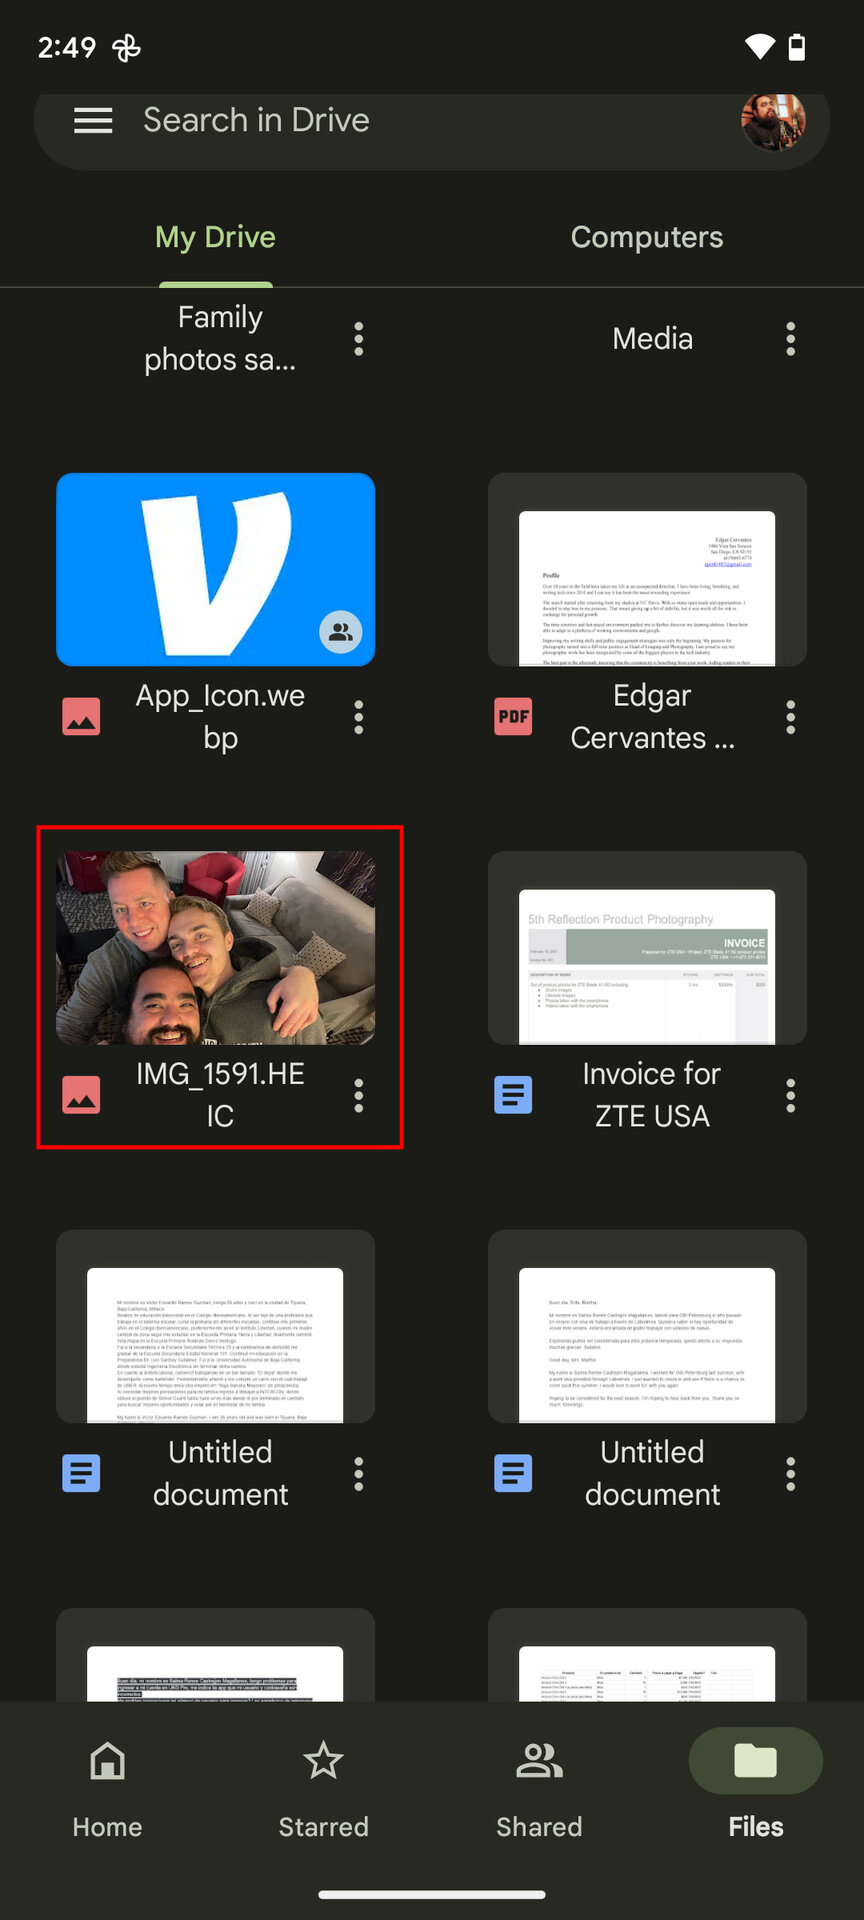 Transfer photos from iPhone to Android using Google Drive 5